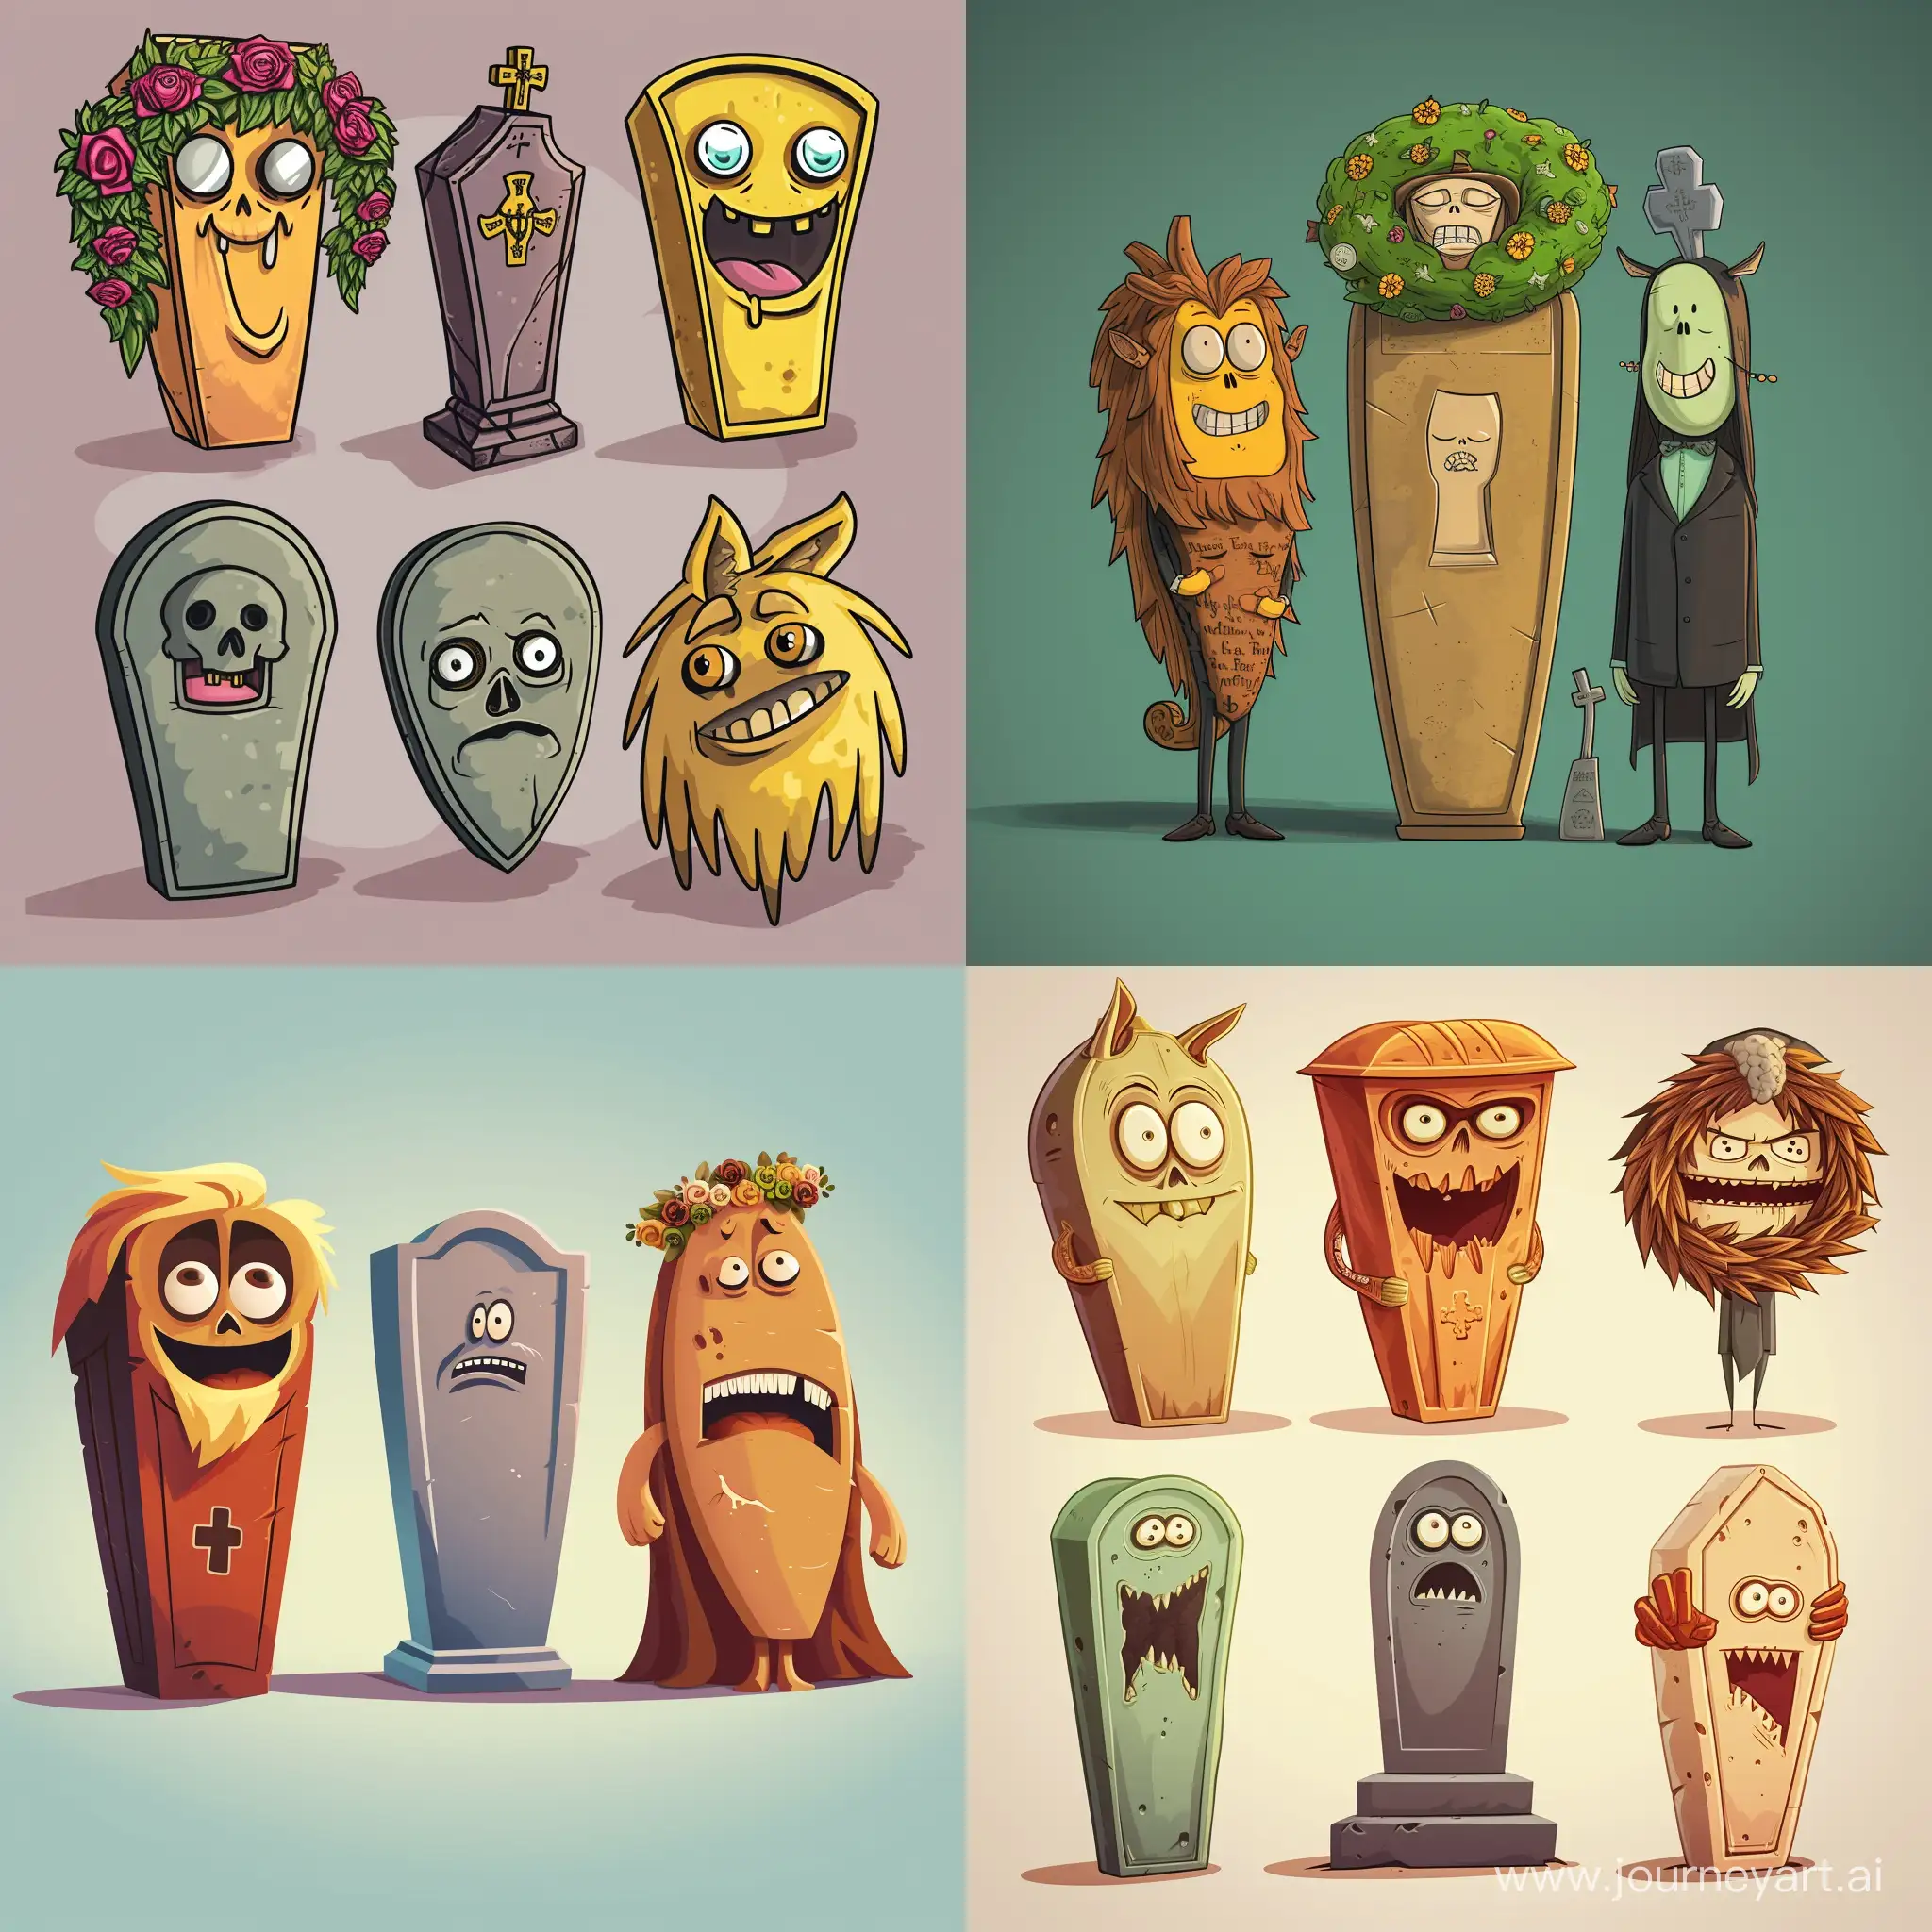 Whimsical-Anthropomorphic-Objects-in-Adult-Cartoon-Style